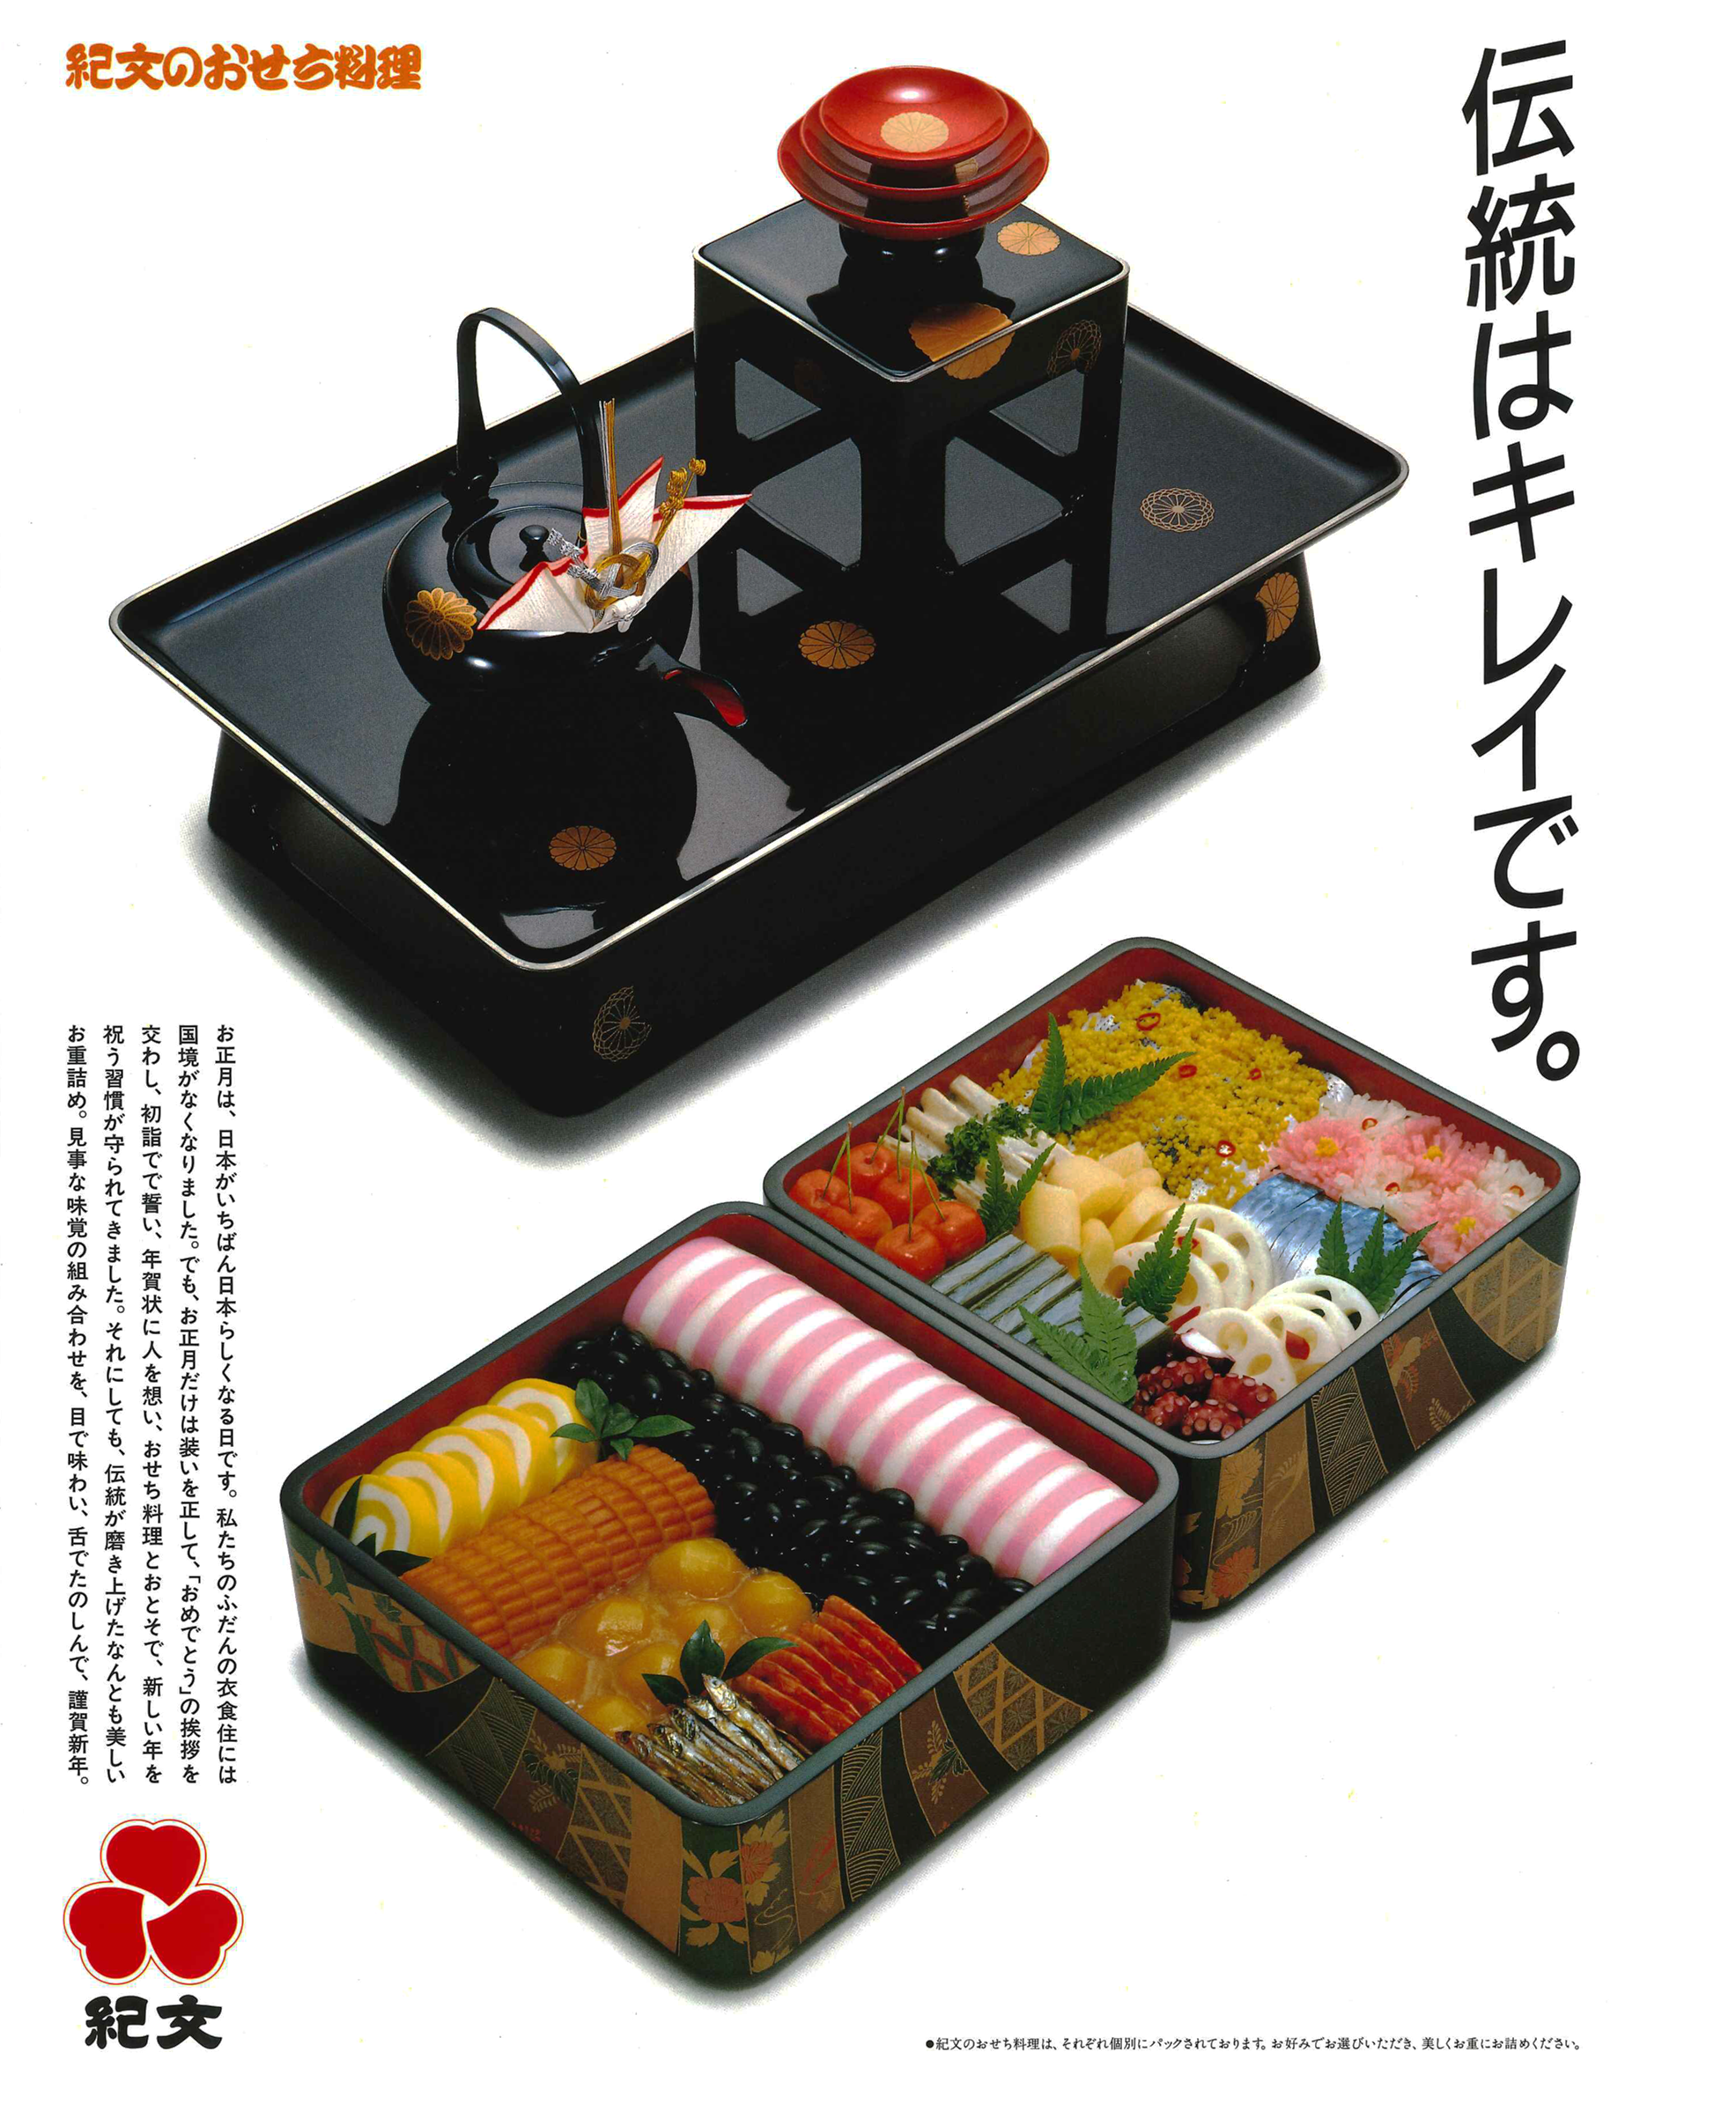 Magazine advertisement for osechi in 1986